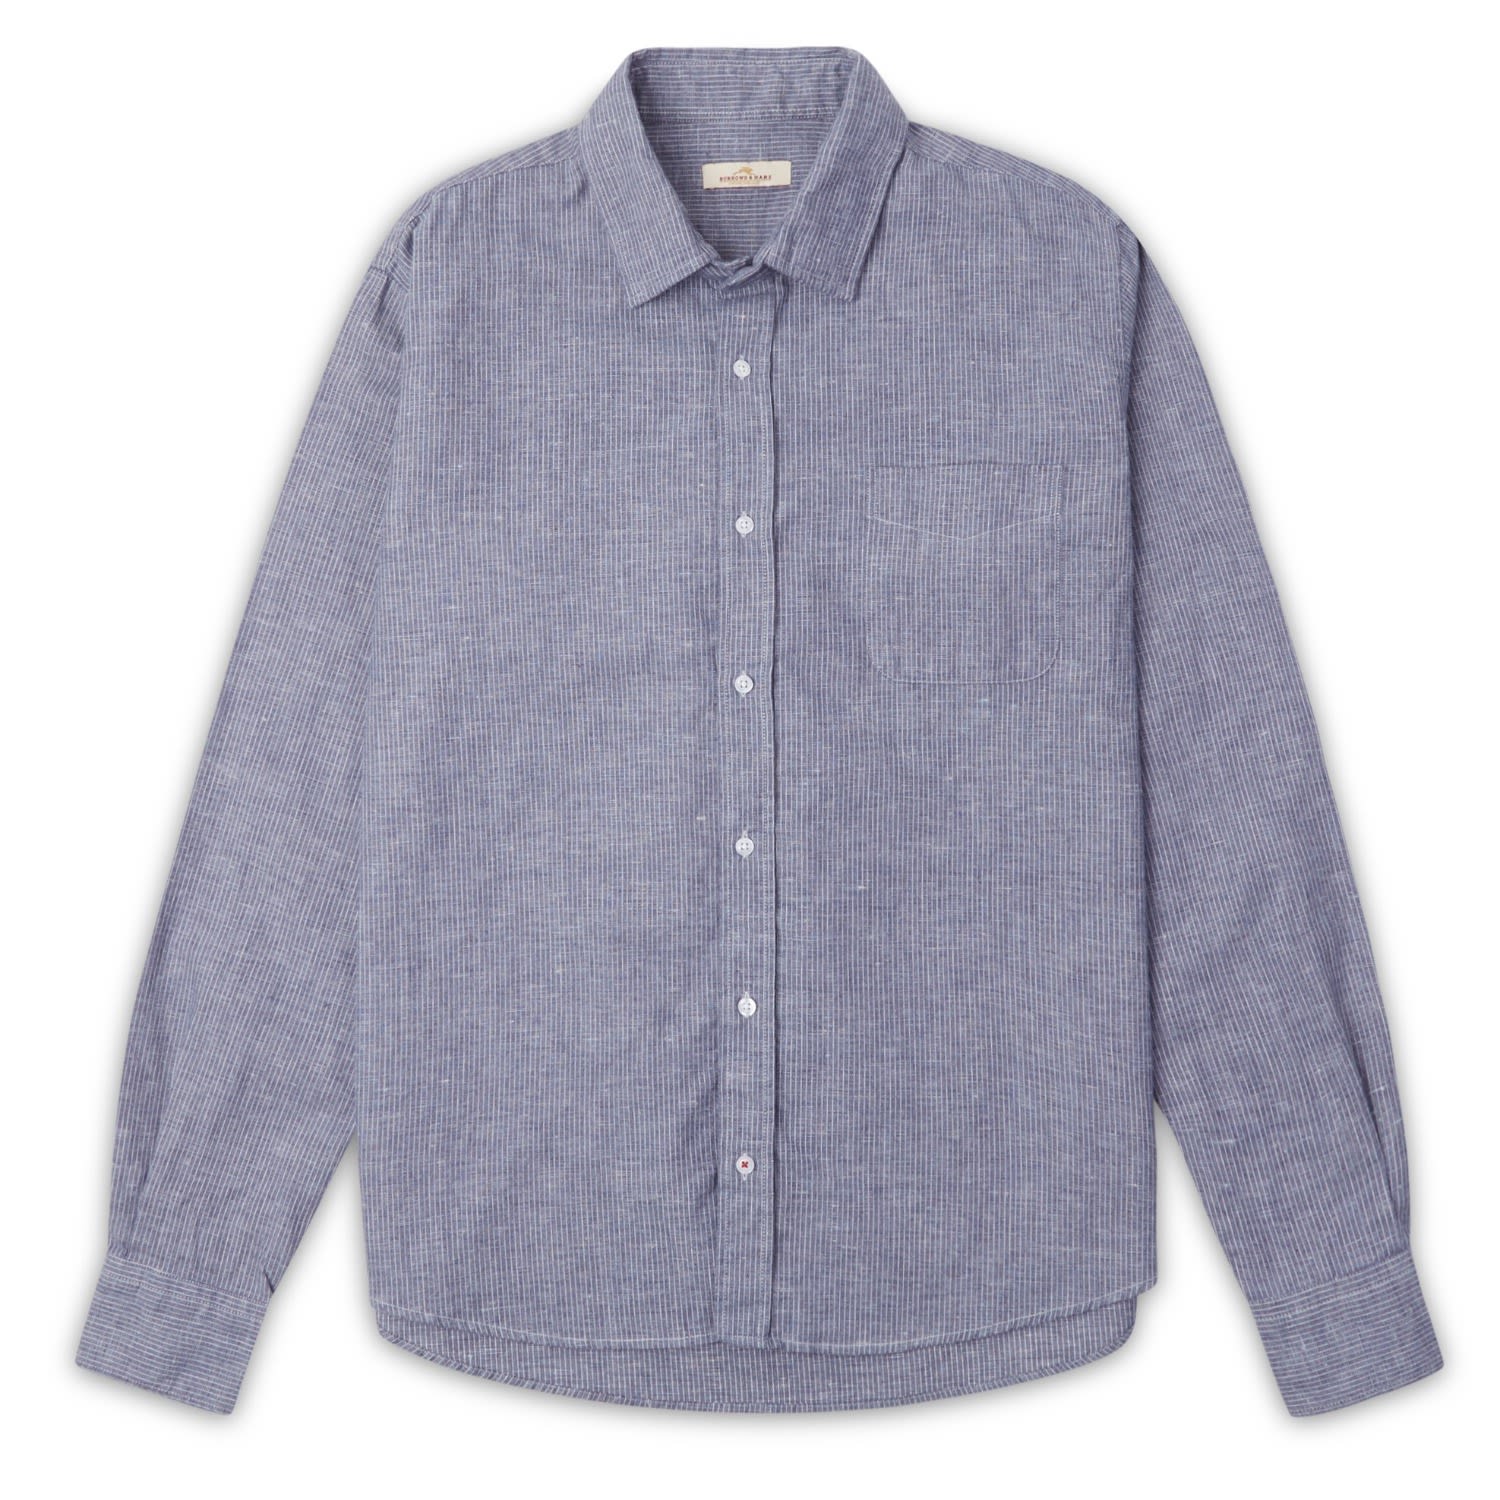 Burrows And Hare Men's Blue Pinstripe Shirt